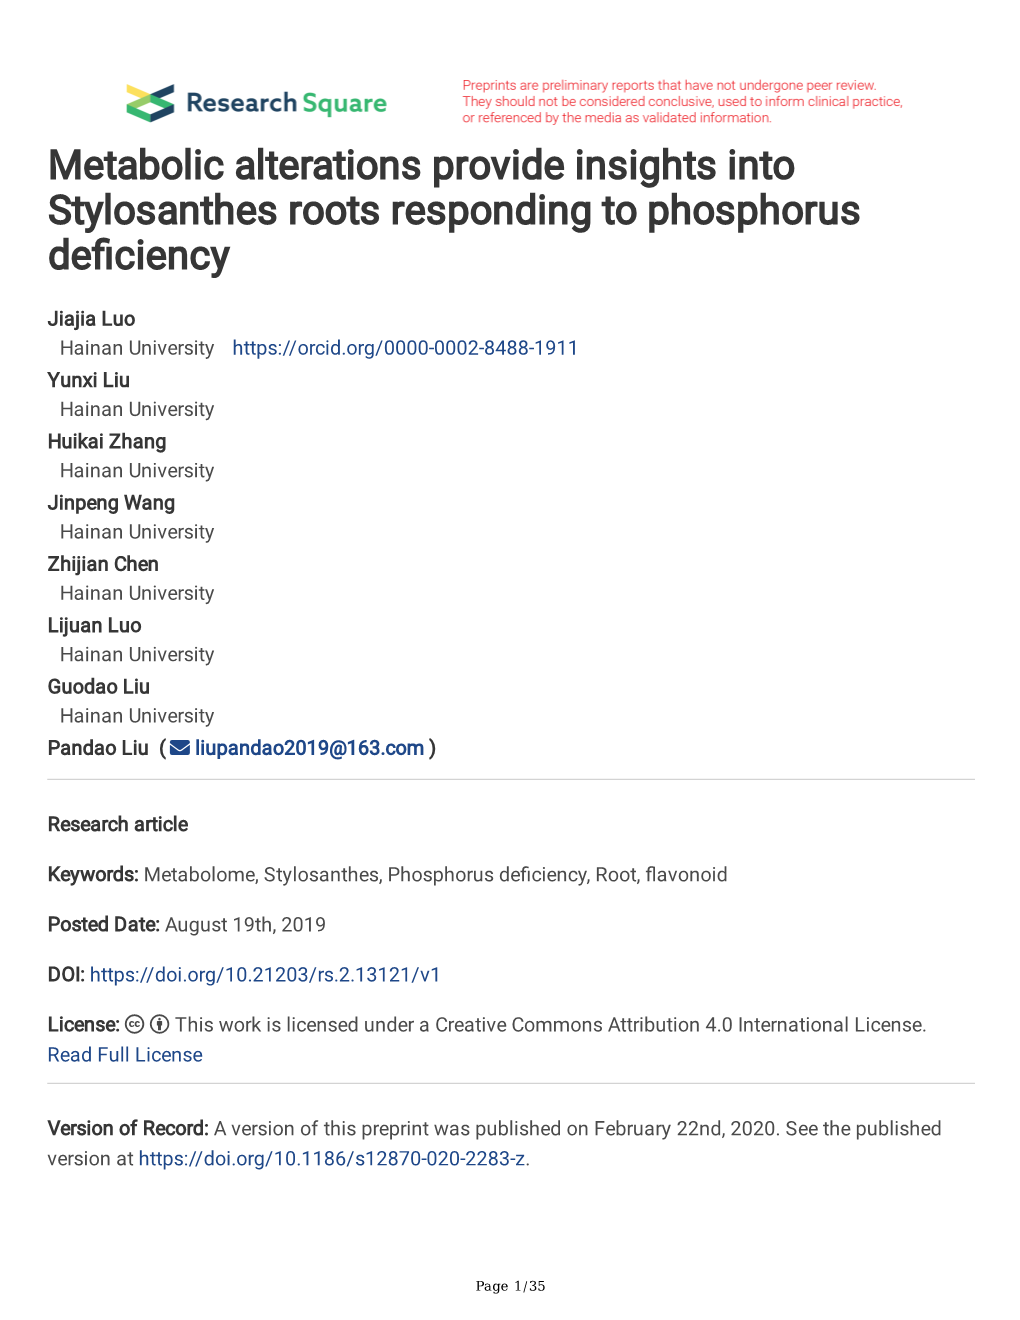 Metabolic Alterations Provide Insights Into Stylosanthes Roots Responding to Phosphorus Defciency